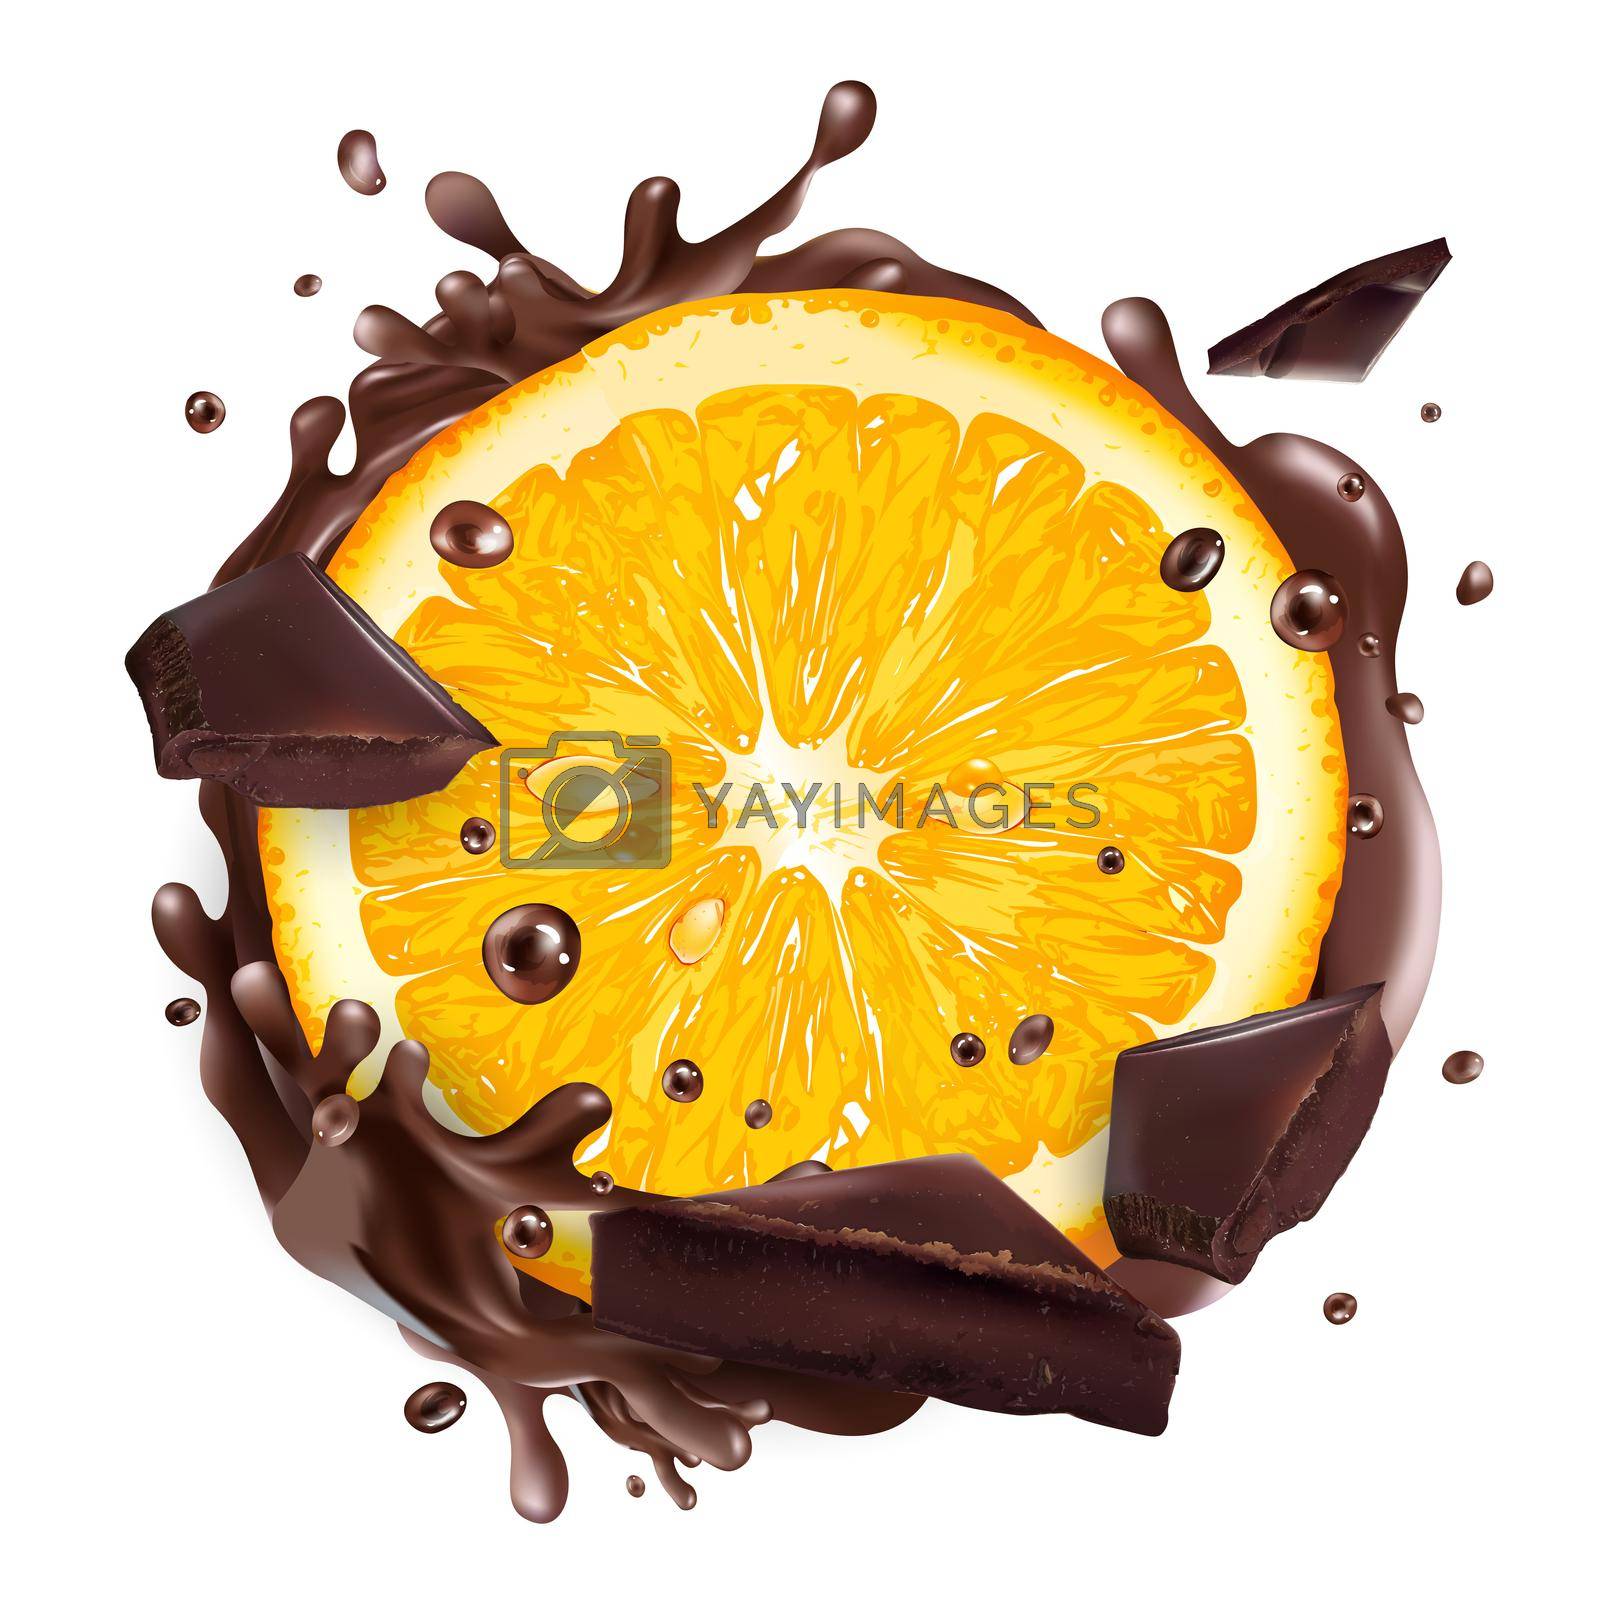 Royalty free image of Slice of orange with chocolate pieces and splashes. by ConceptCafe